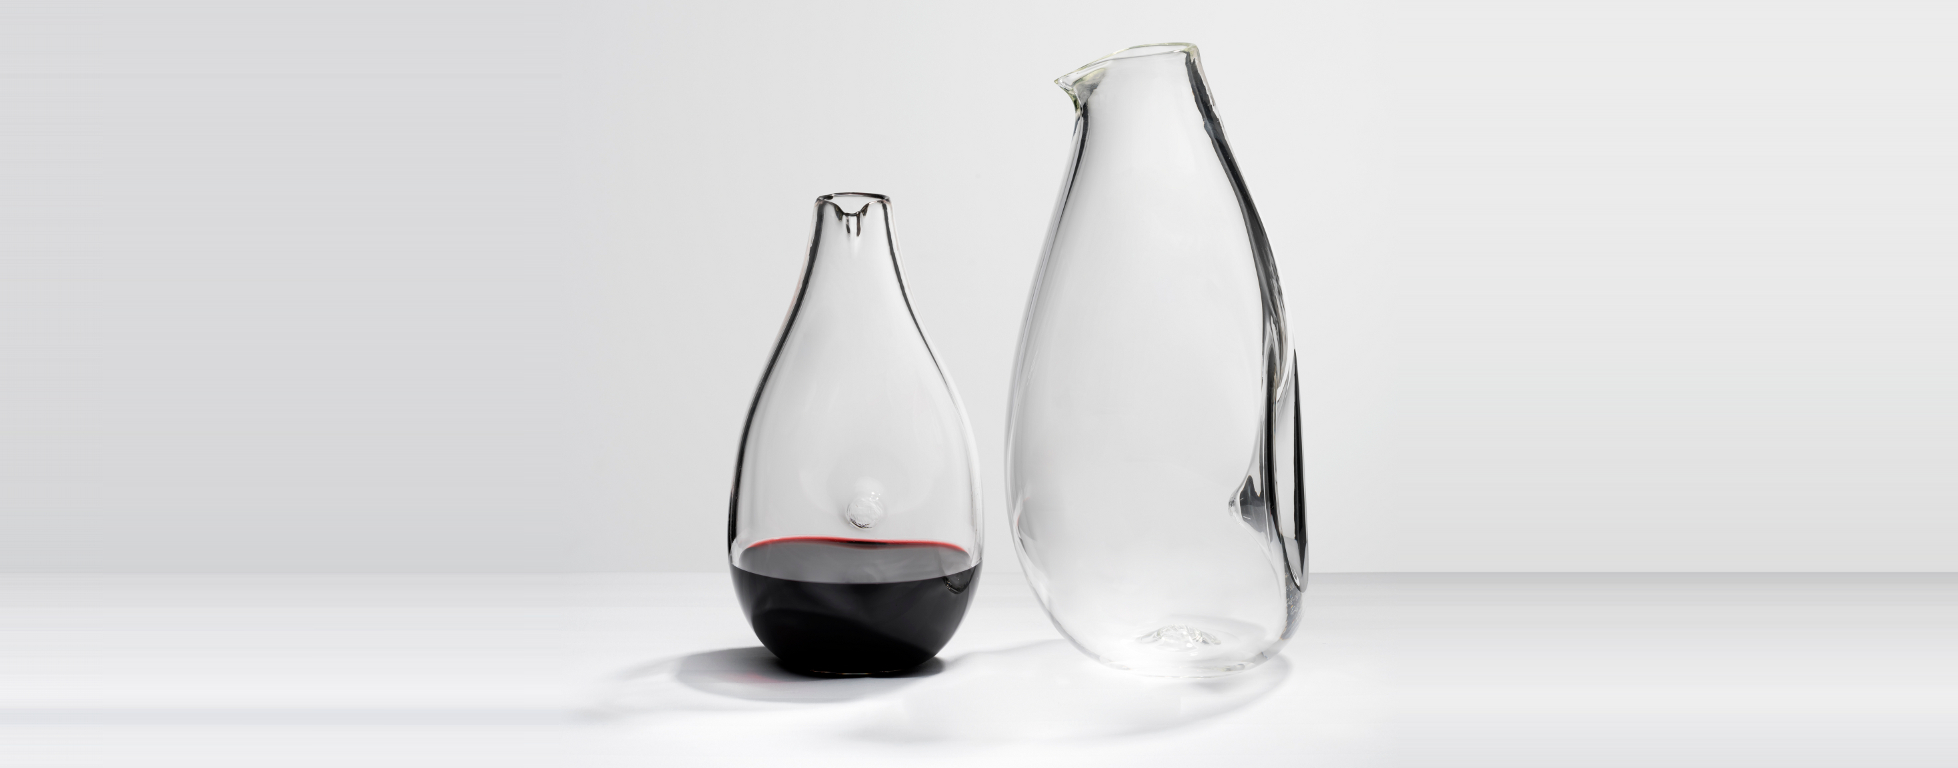 two Penguin decanters